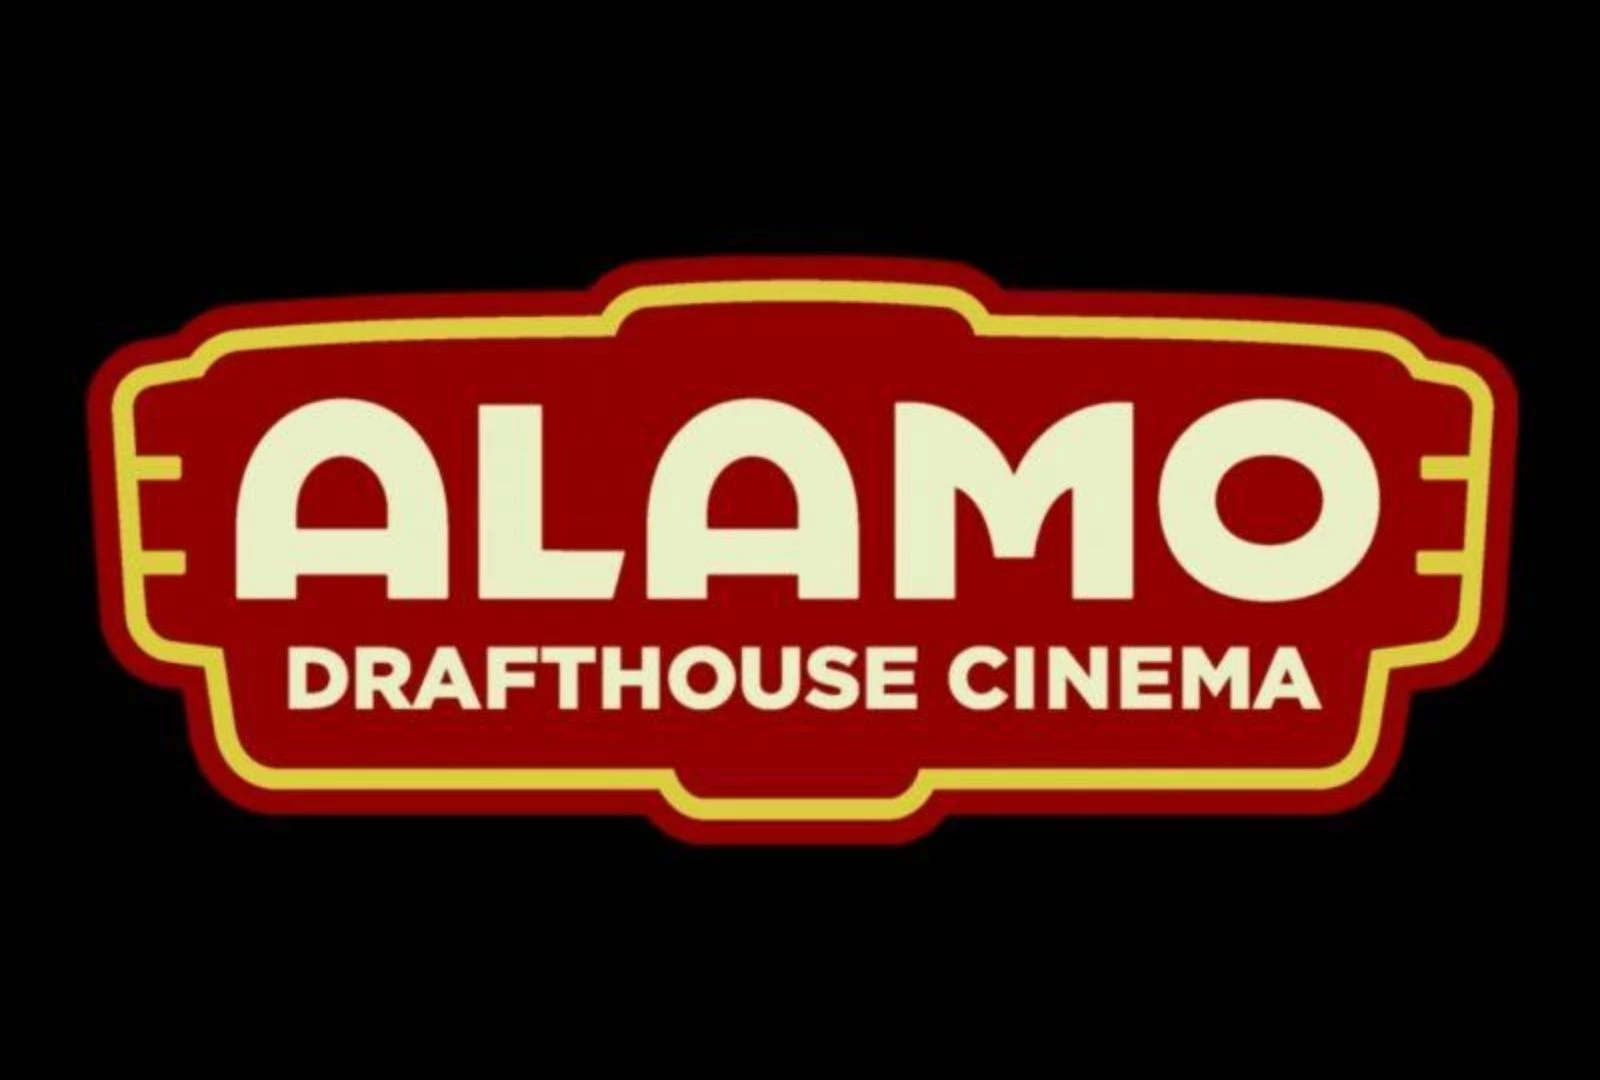 We're Giving Away 5 Alamo Drafthouse Exclusive Solo: A Star Wars